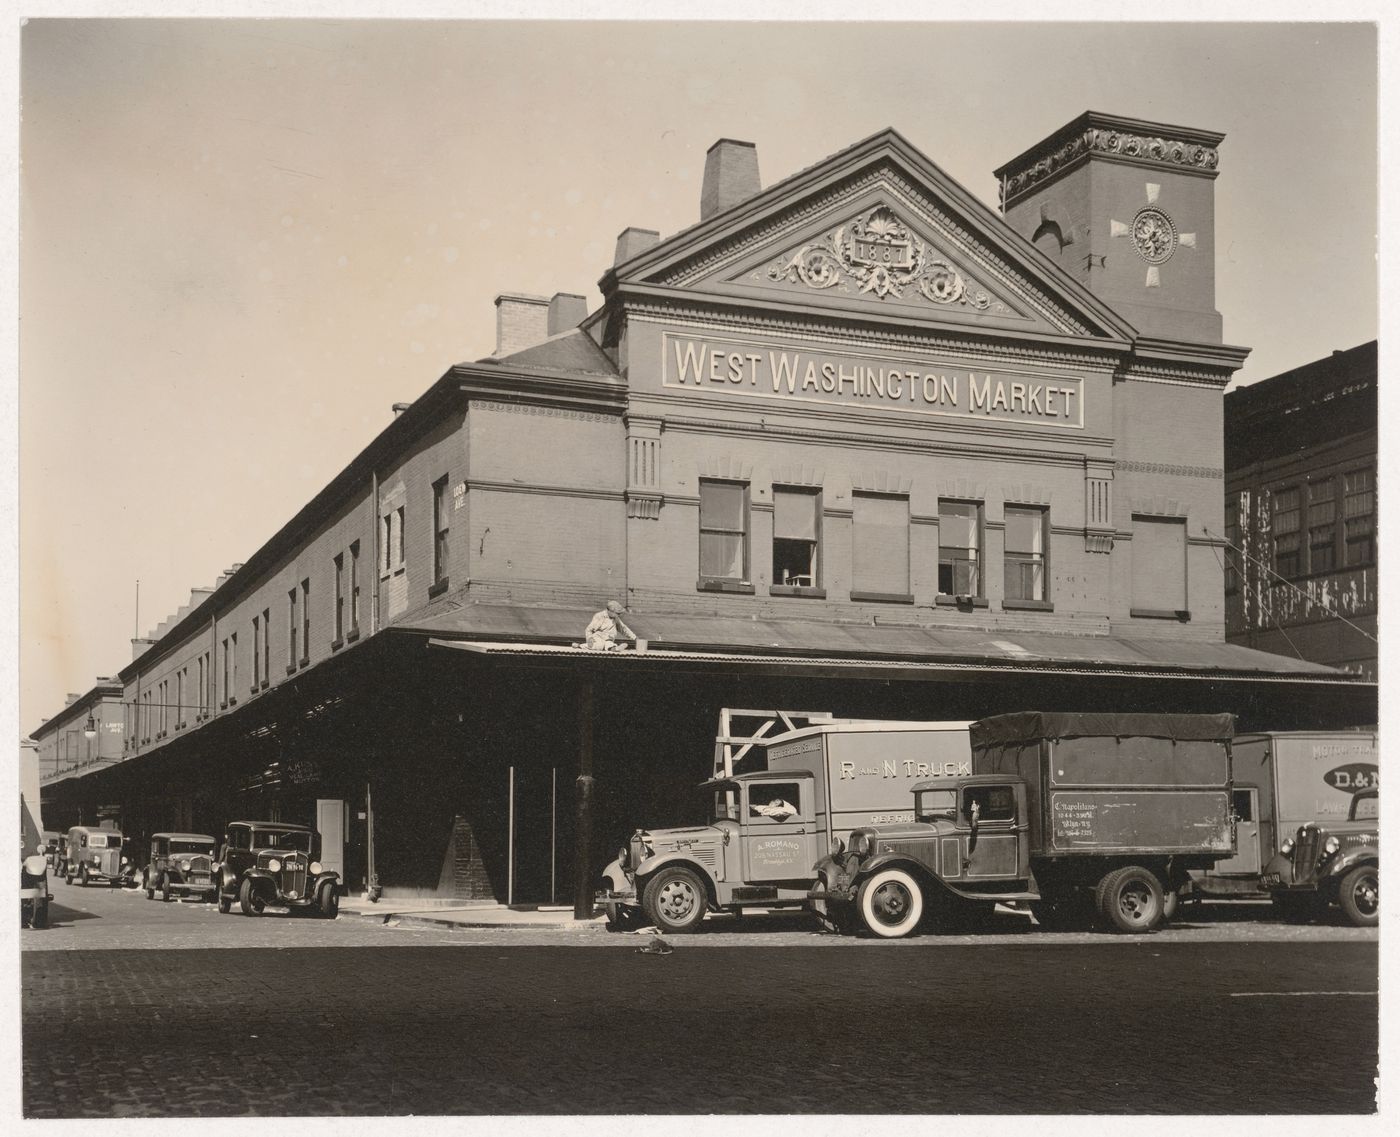 Intersection of West Street and Loew Avenue, view of West Washington Market, New York City, New York